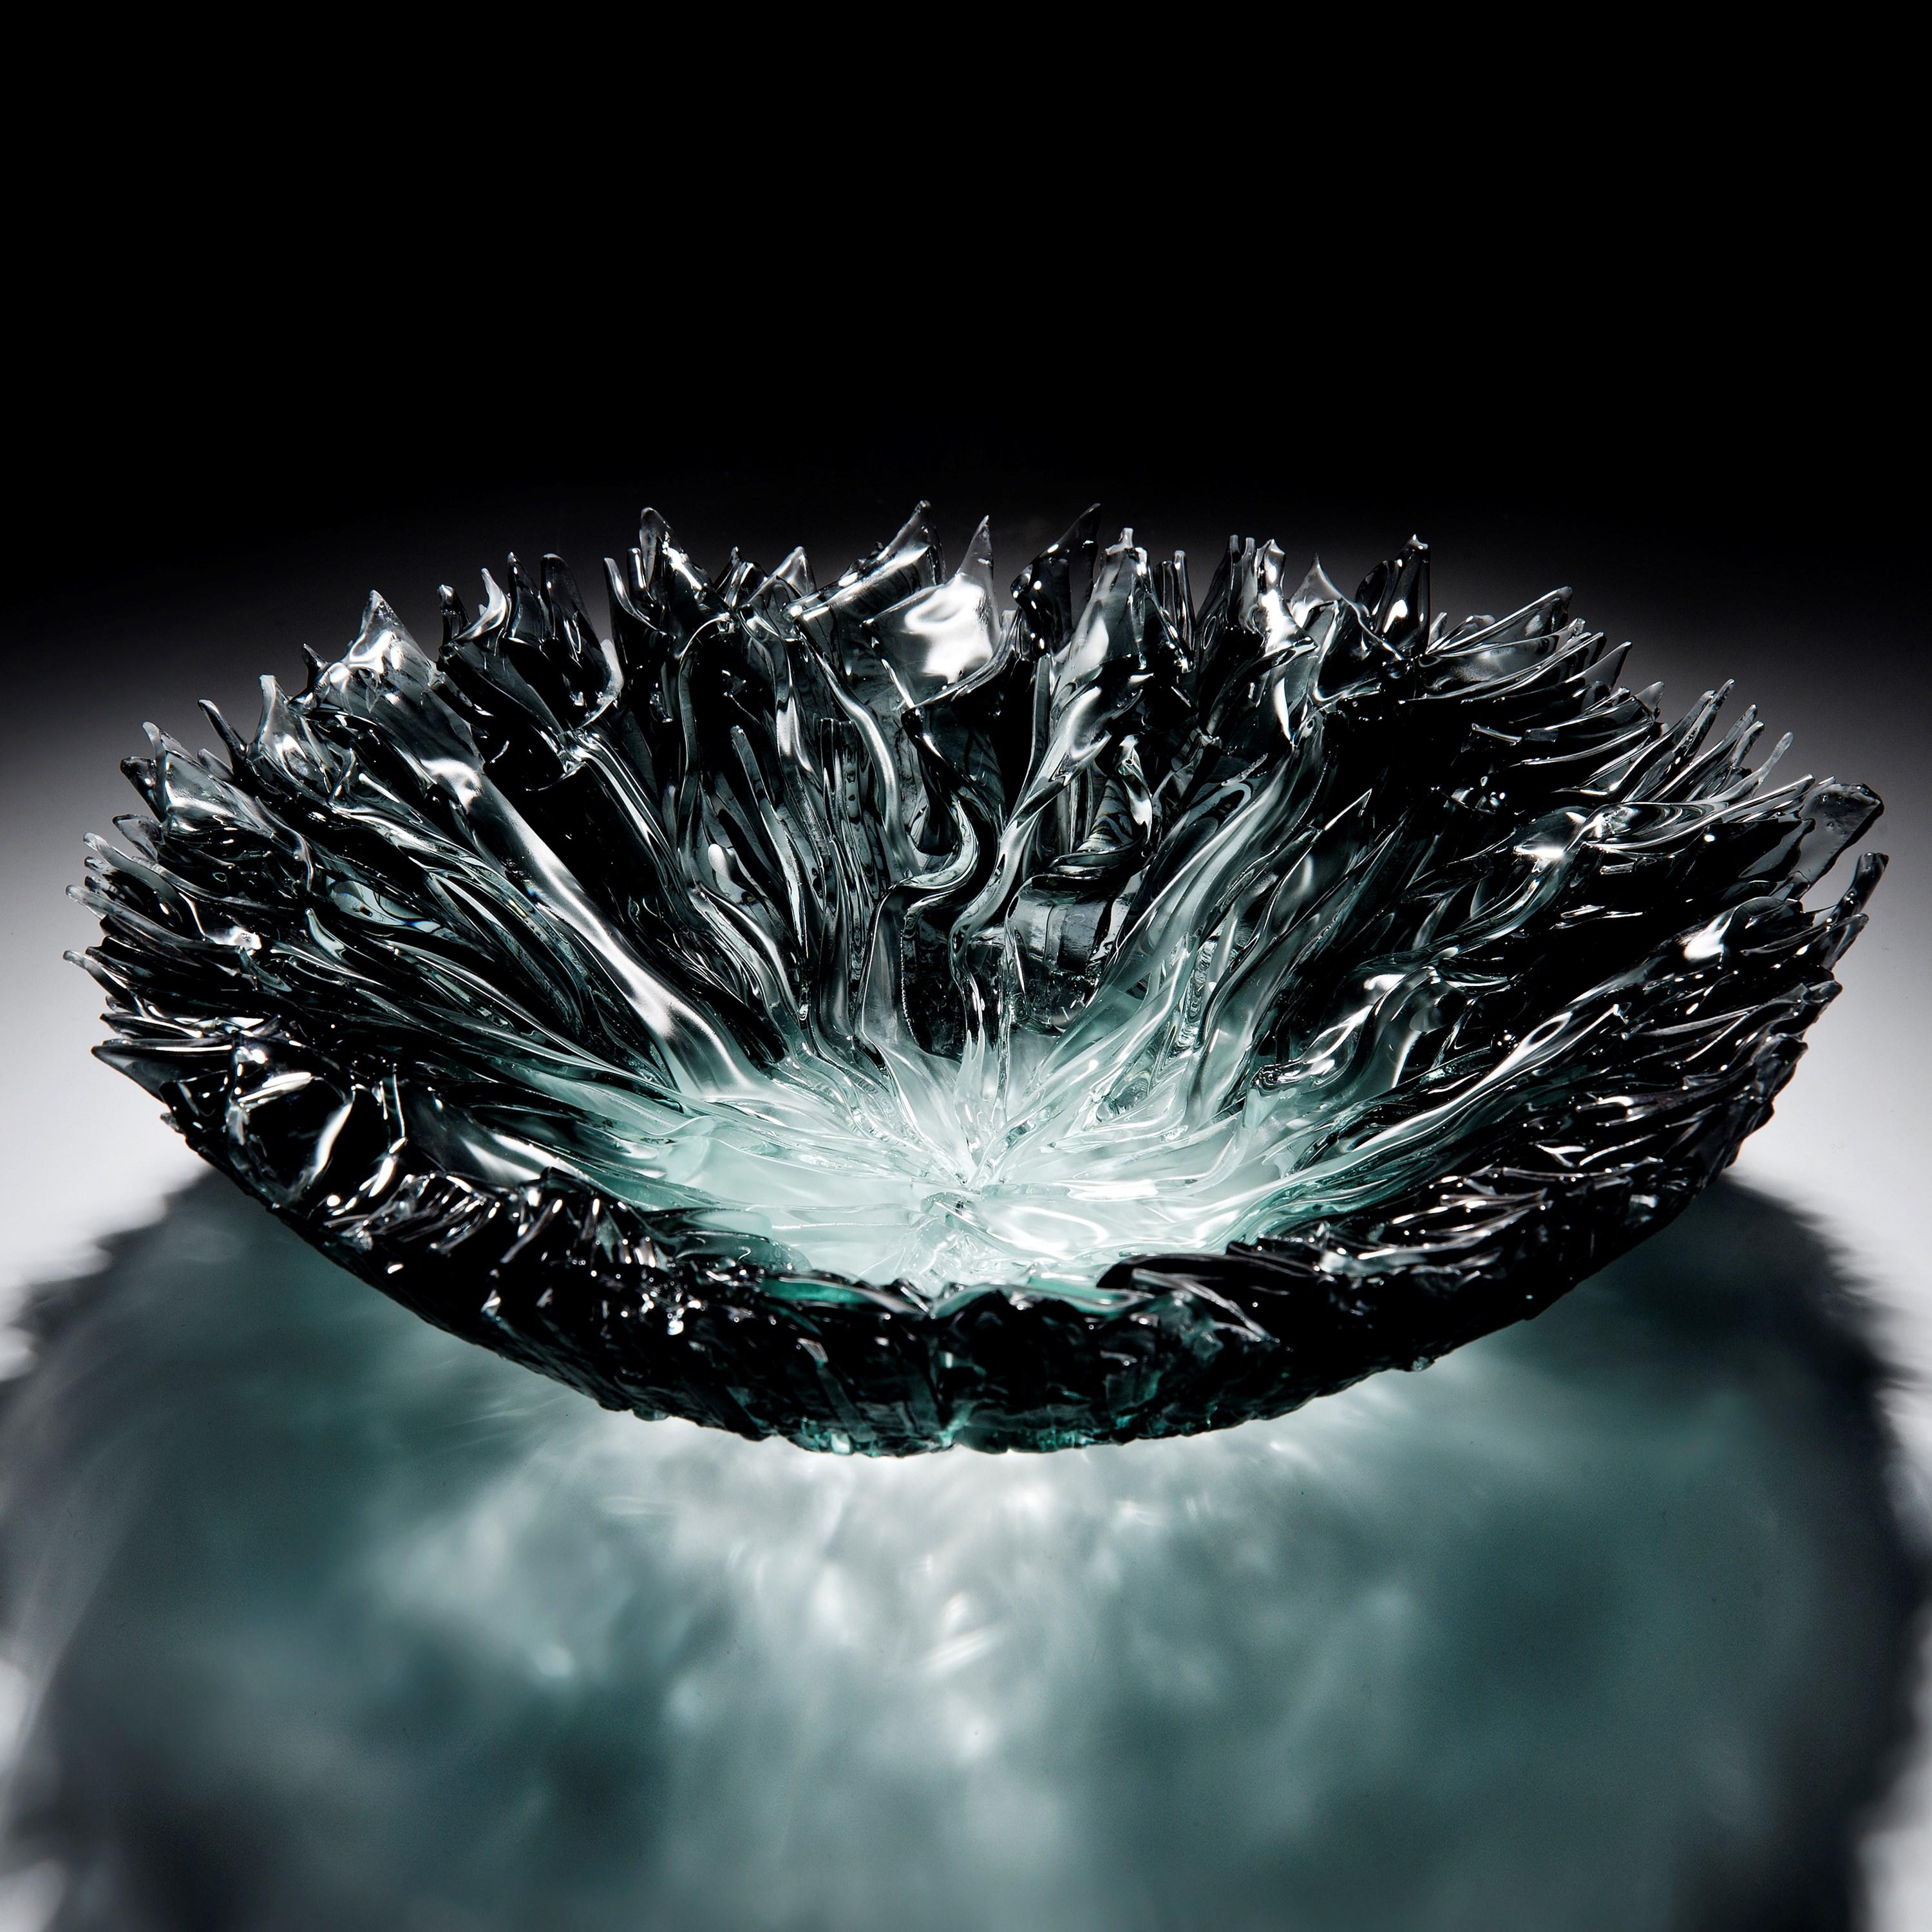 'Bloom bowl in grey' is a unique sculptural centrepiece created by the British artist, Wayne Charmer.

For Wayne Charmer, the fascination of glass is to exploit its translucent and reflective qualities. Inspired by nature, his signature techniques